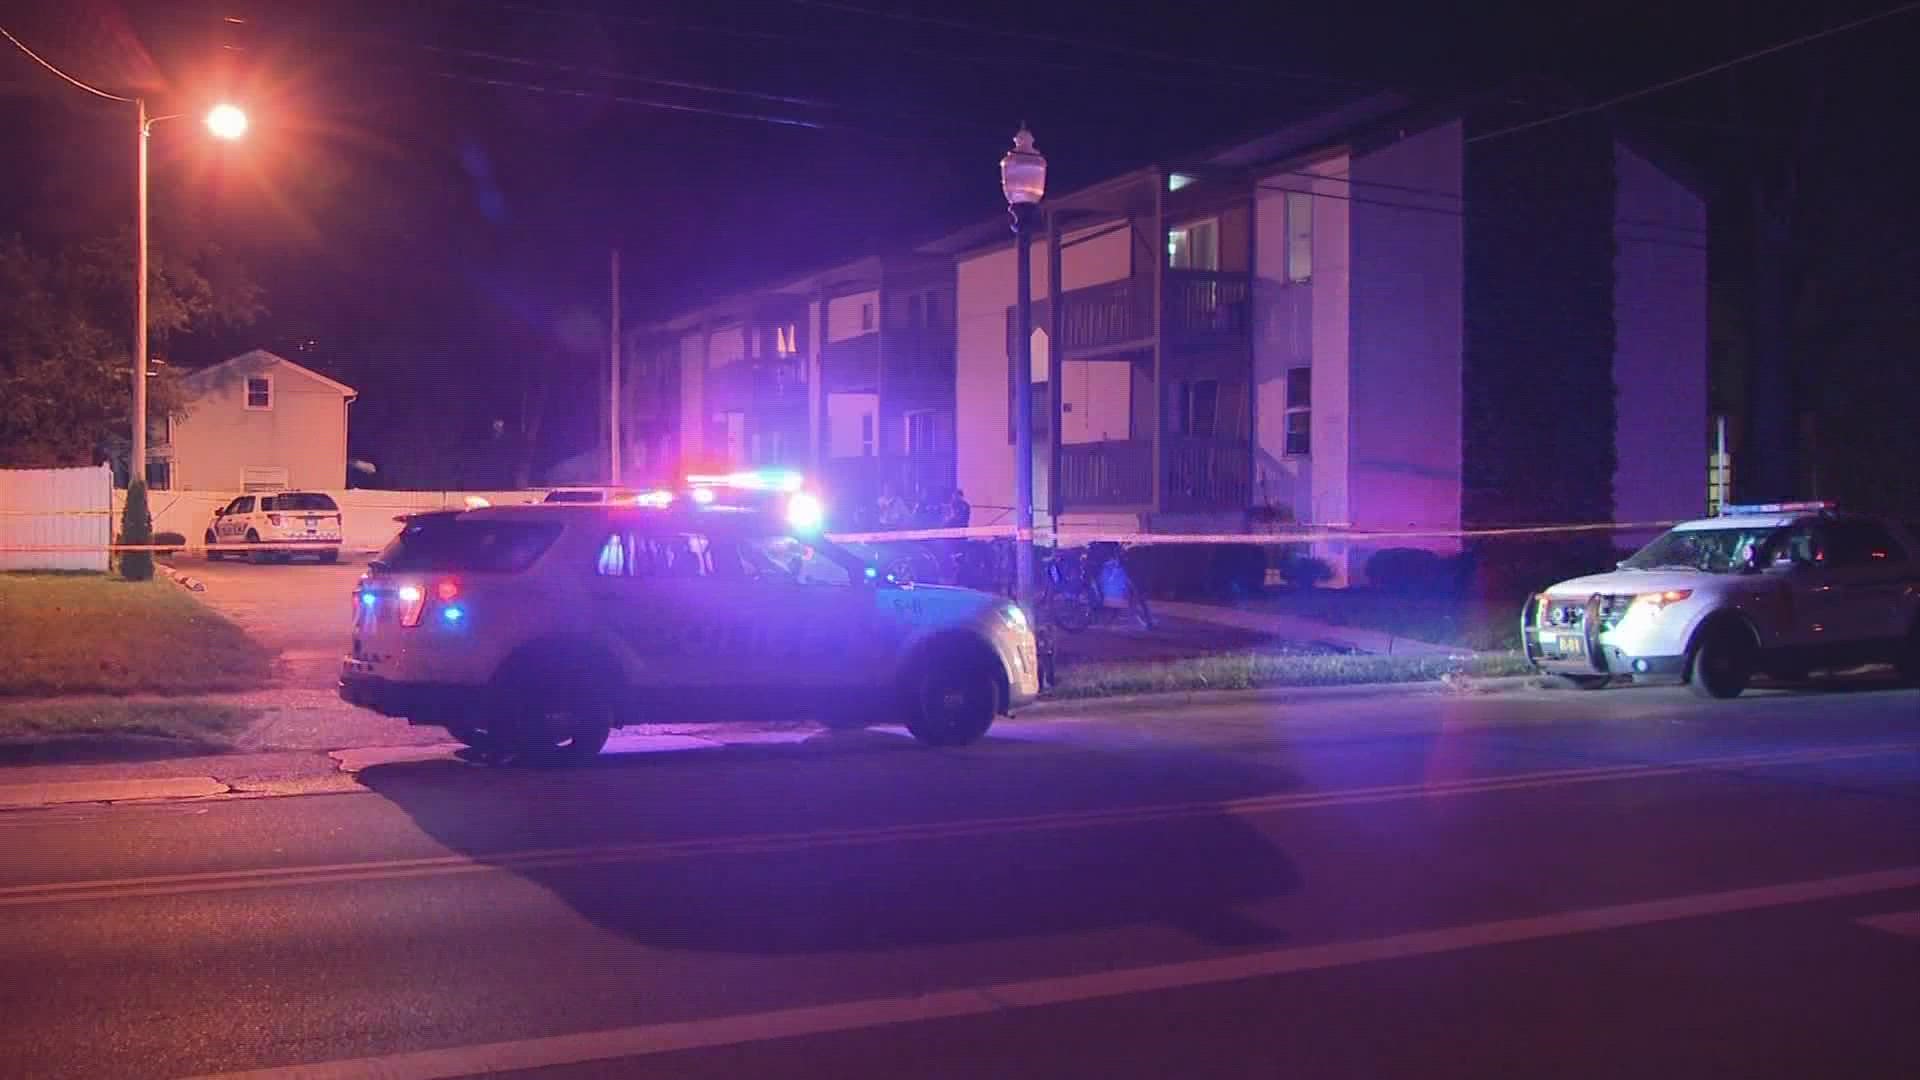 One shooting happened in the Franklinton neighborhood while the other happened in the far east side.